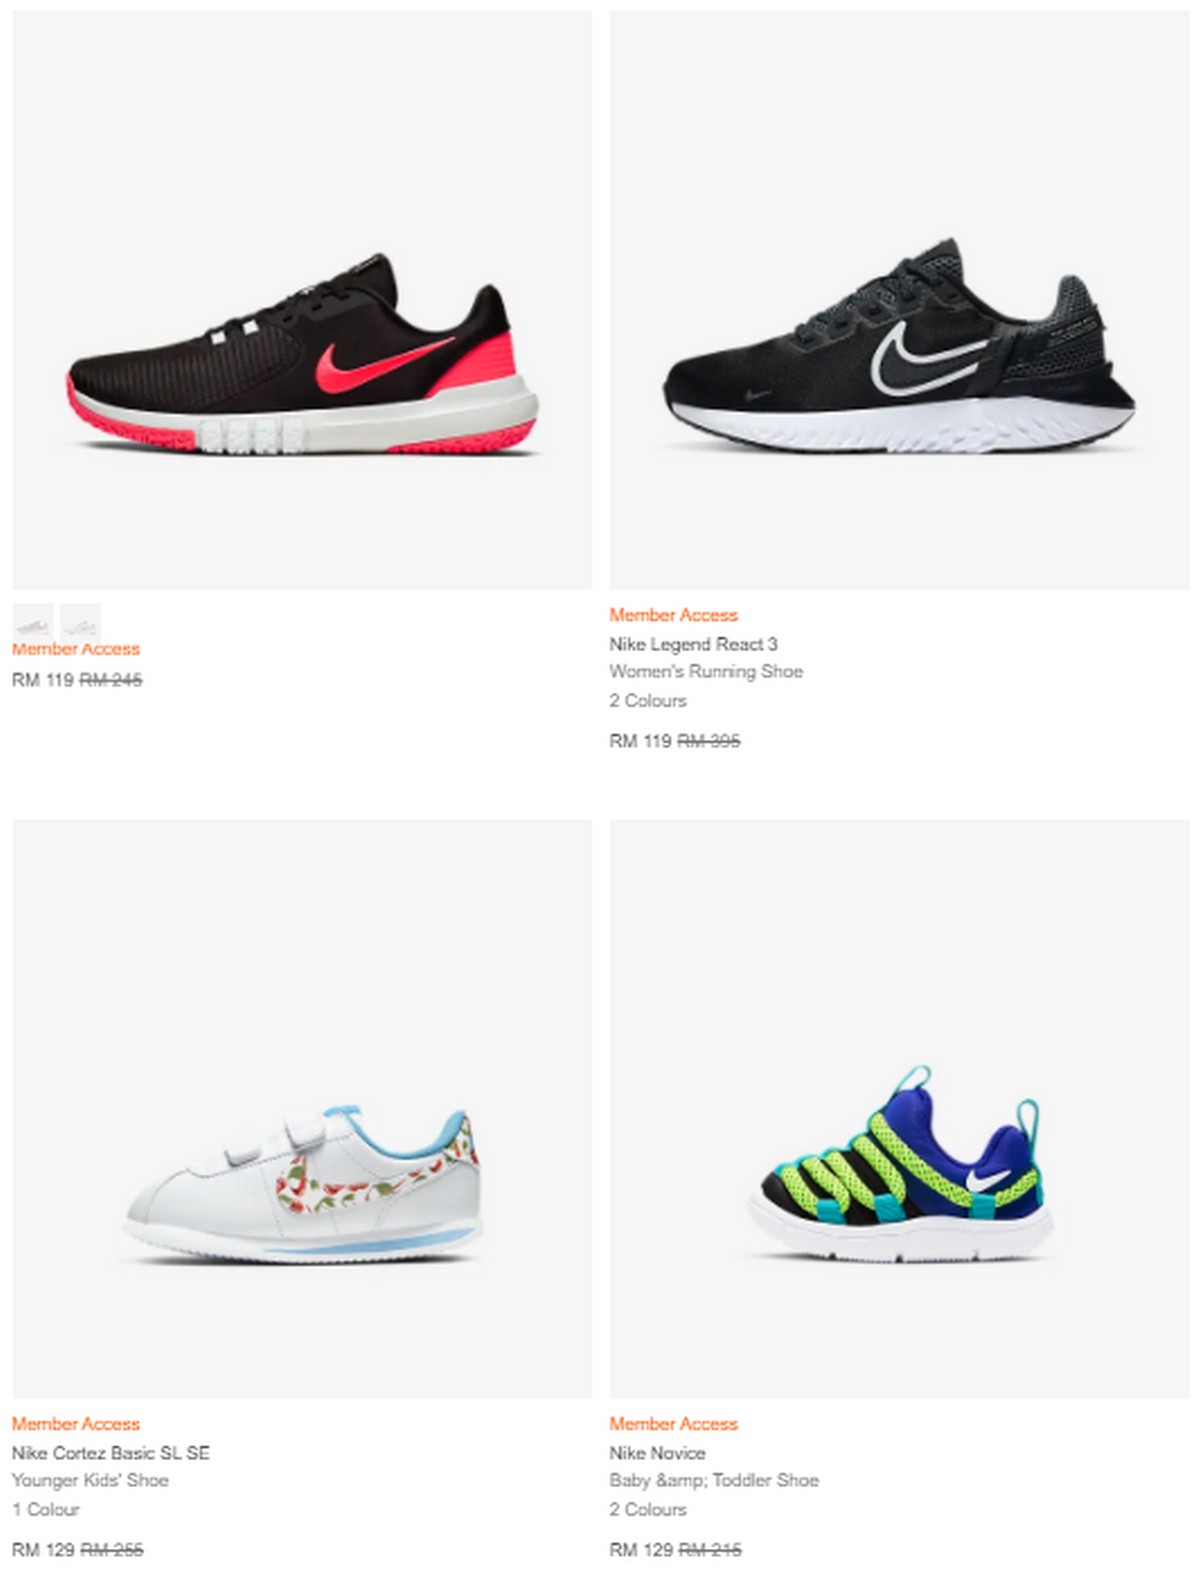 nike-11-11-preview-offer-new-9 - LifeStyle 